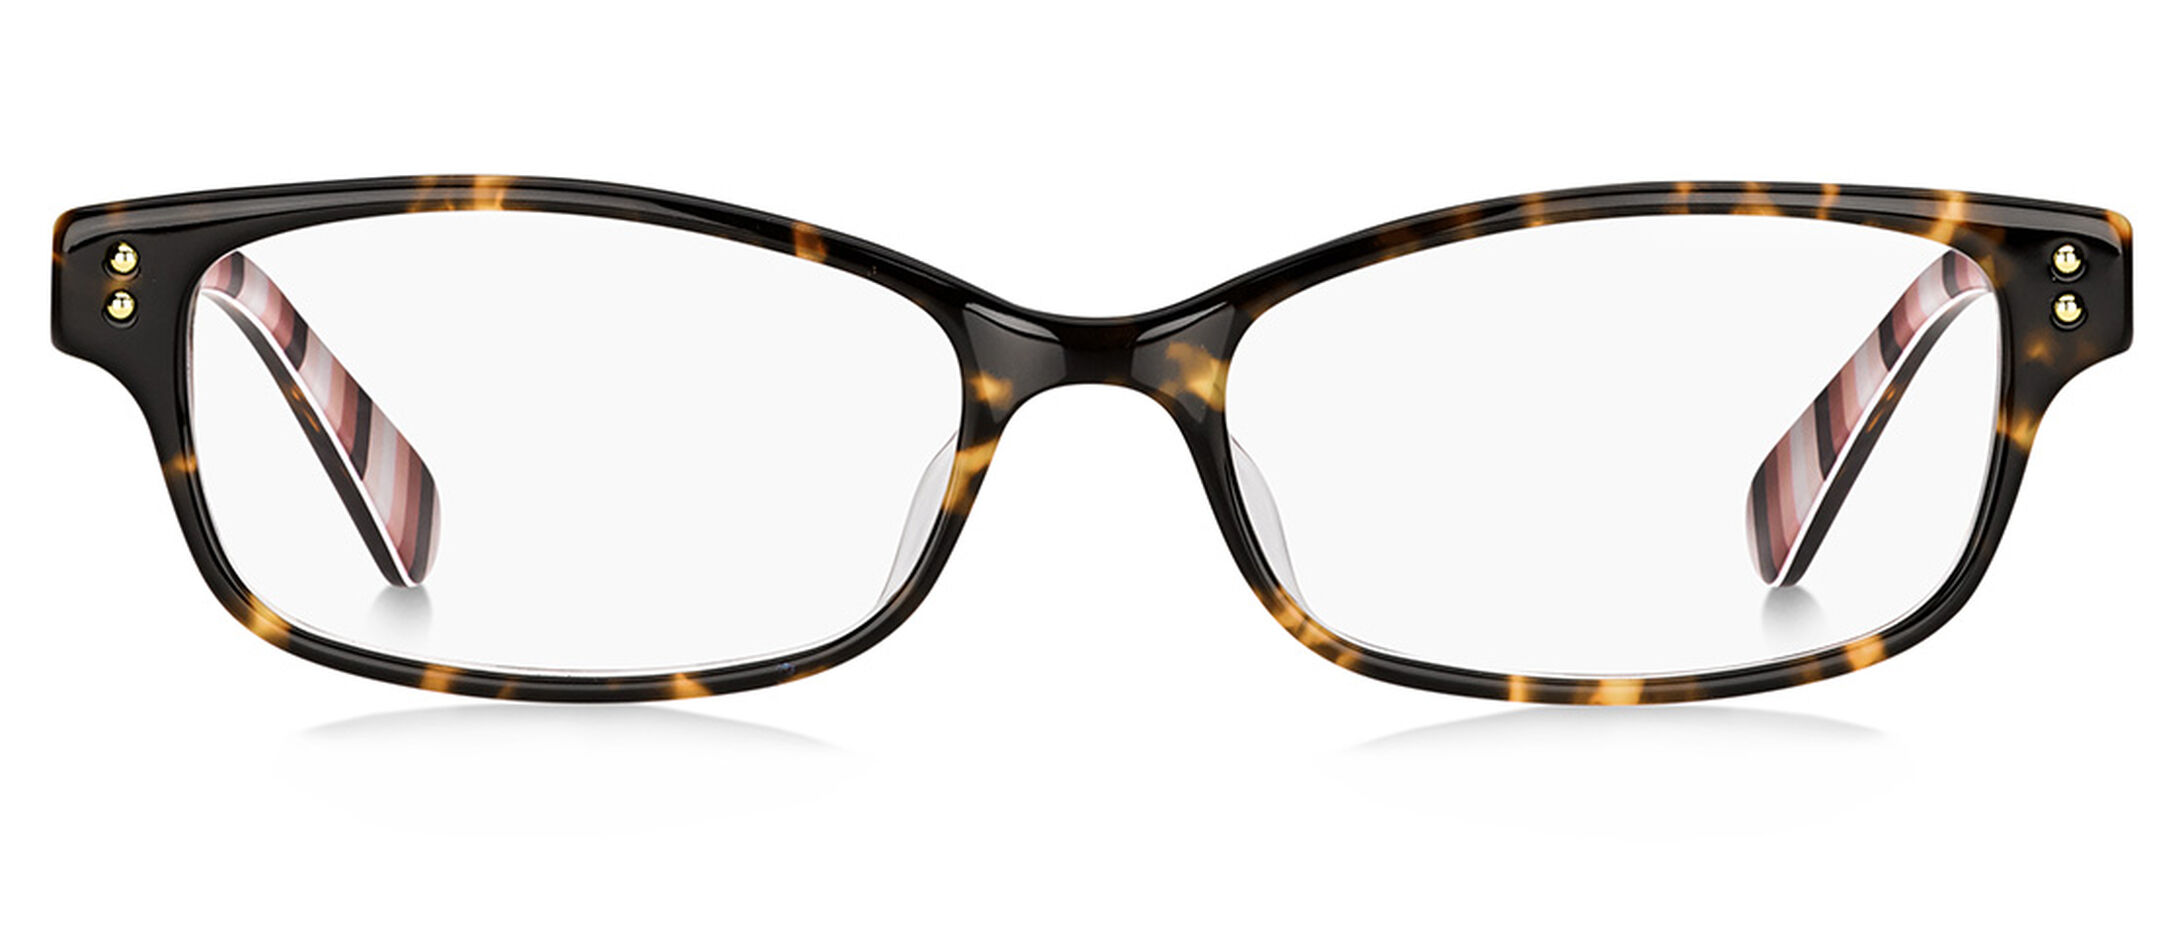 Kate Spade LUCYANN2 Glasses | Free Shipping and Returns | Eyeconic